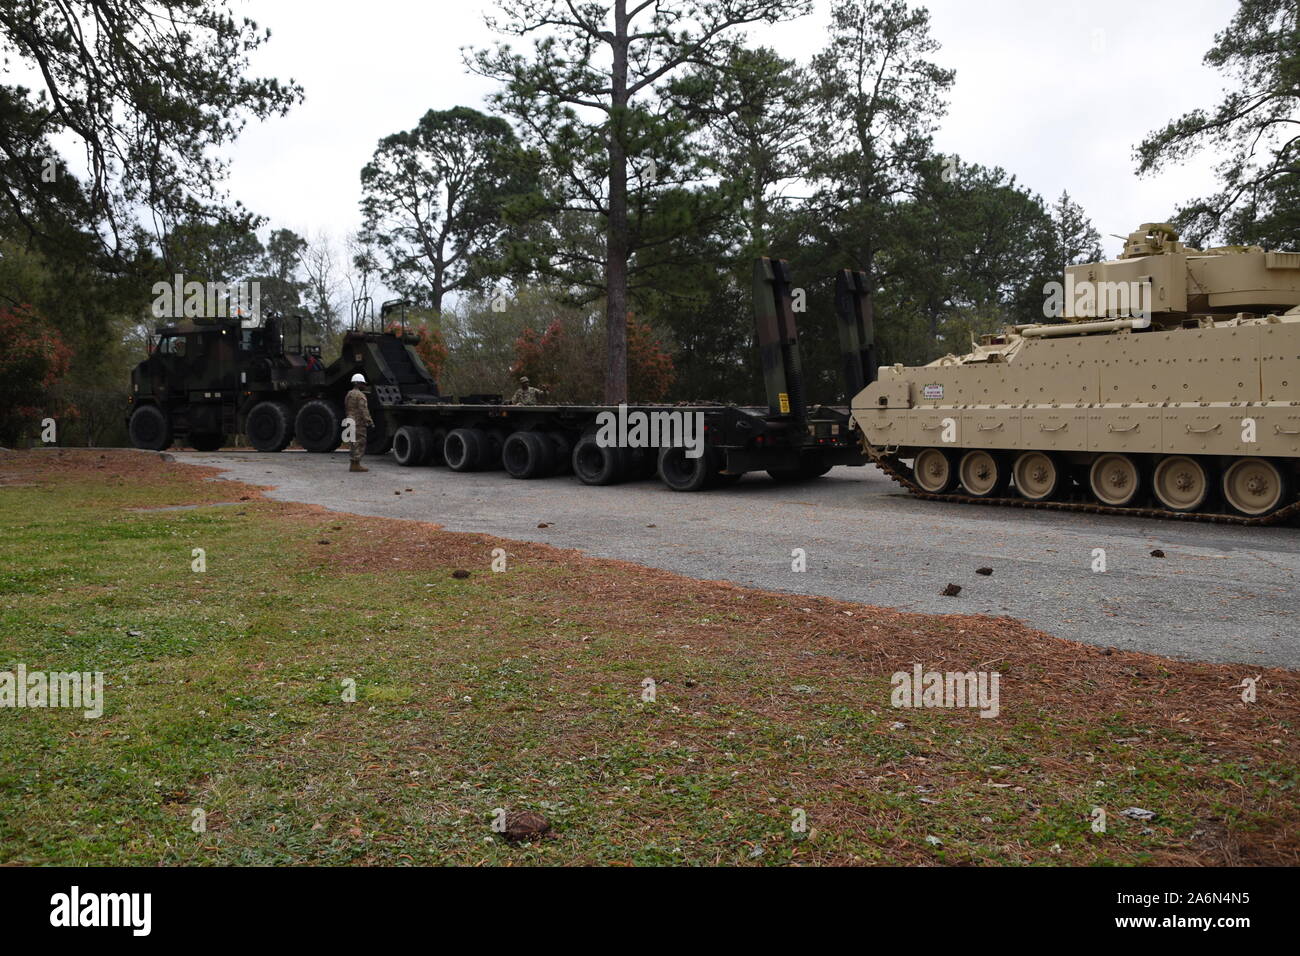 The South Carolina National Guard Unit Training Equipment Site partnered with Fort Jackson March 26, 2019 to help move vehicles from the U.S Army Basic Combat Training Museum on Fort Jackson, South Carolina to the Logistics Readiness Center to be repainted and renovated as needed to be used as historical displays on the installation. (U.S. Army National Guard photo by Capt. Jessica Donnelly, South Carolina National Guard) Stock Photo